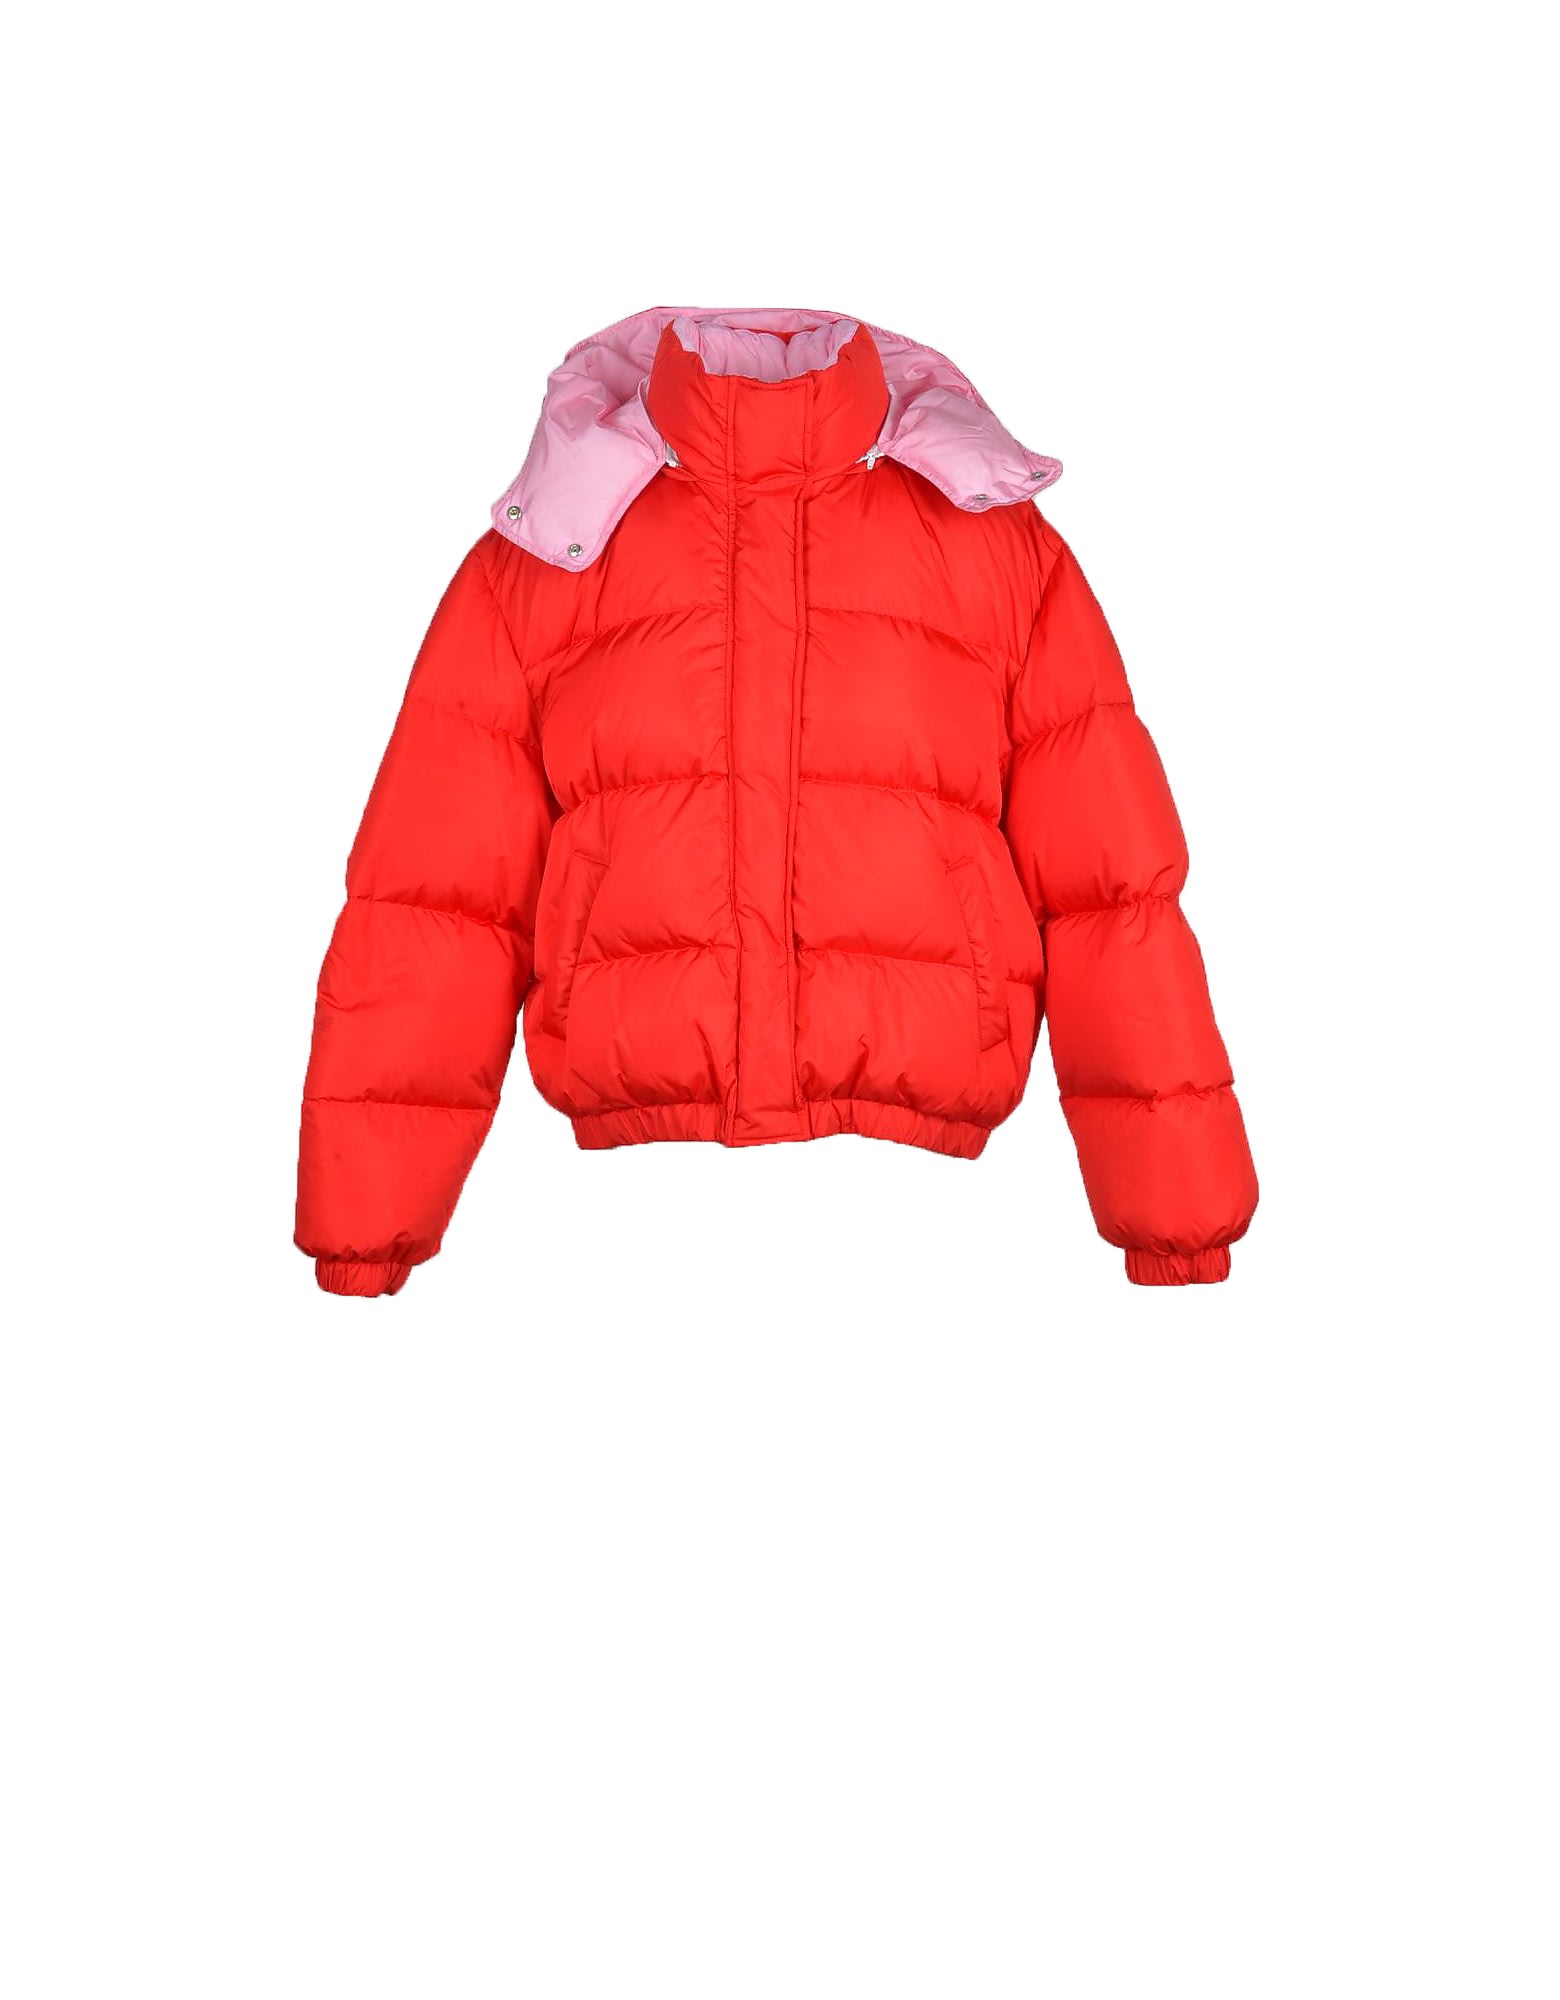 Msgm Womens Red Padded Jacket